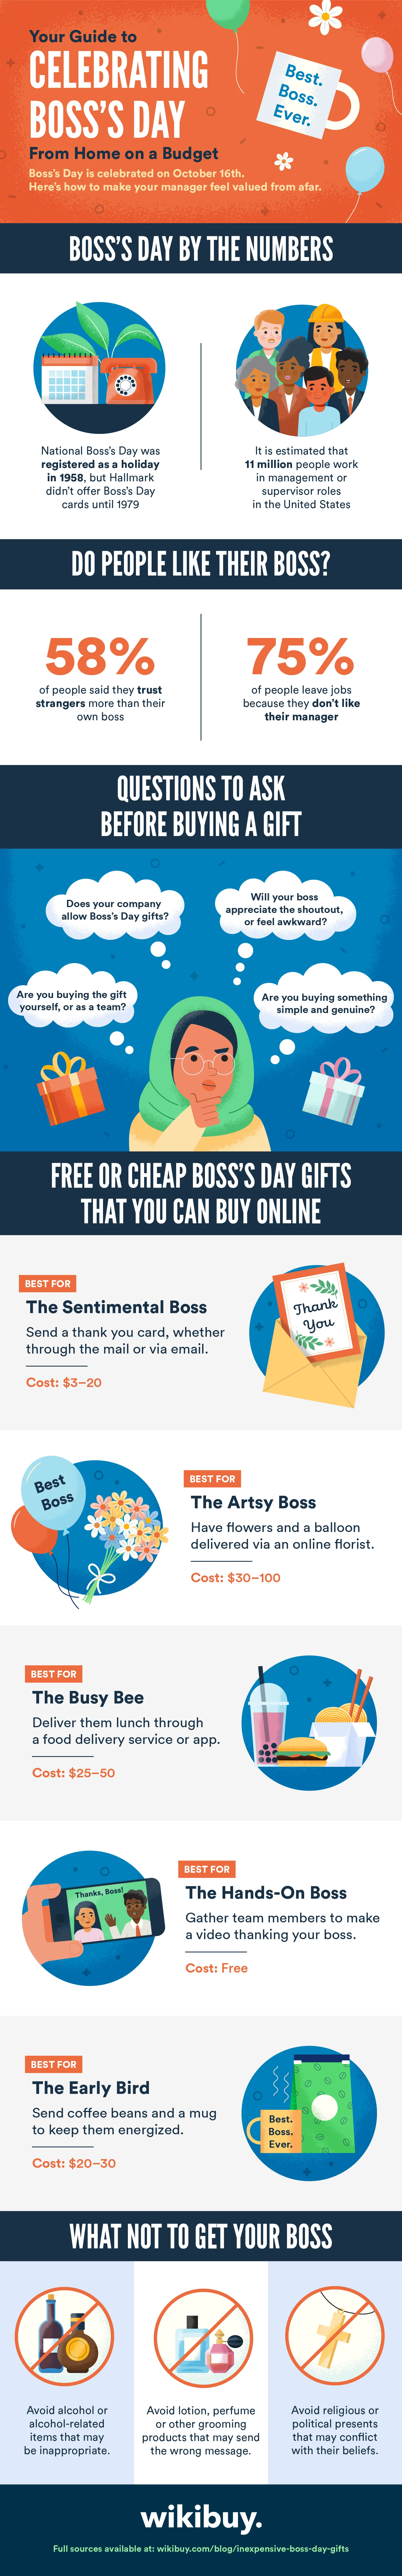 How to Celebrate Boss’s Day Remotely